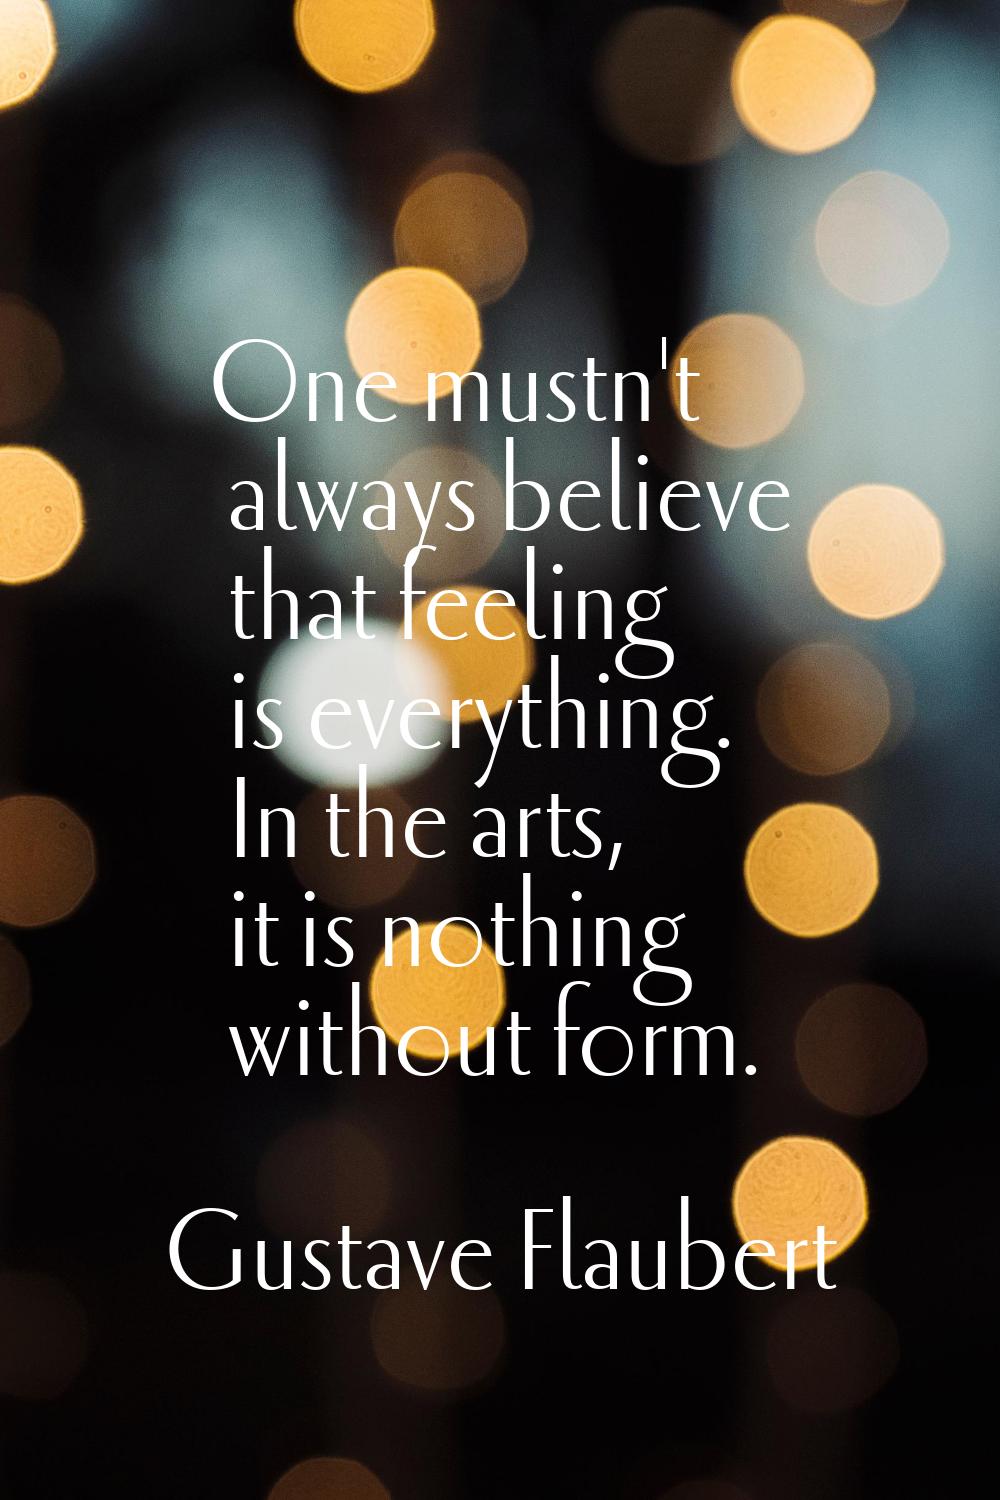 One mustn't always believe that feeling is everything. In the arts, it is nothing without form.